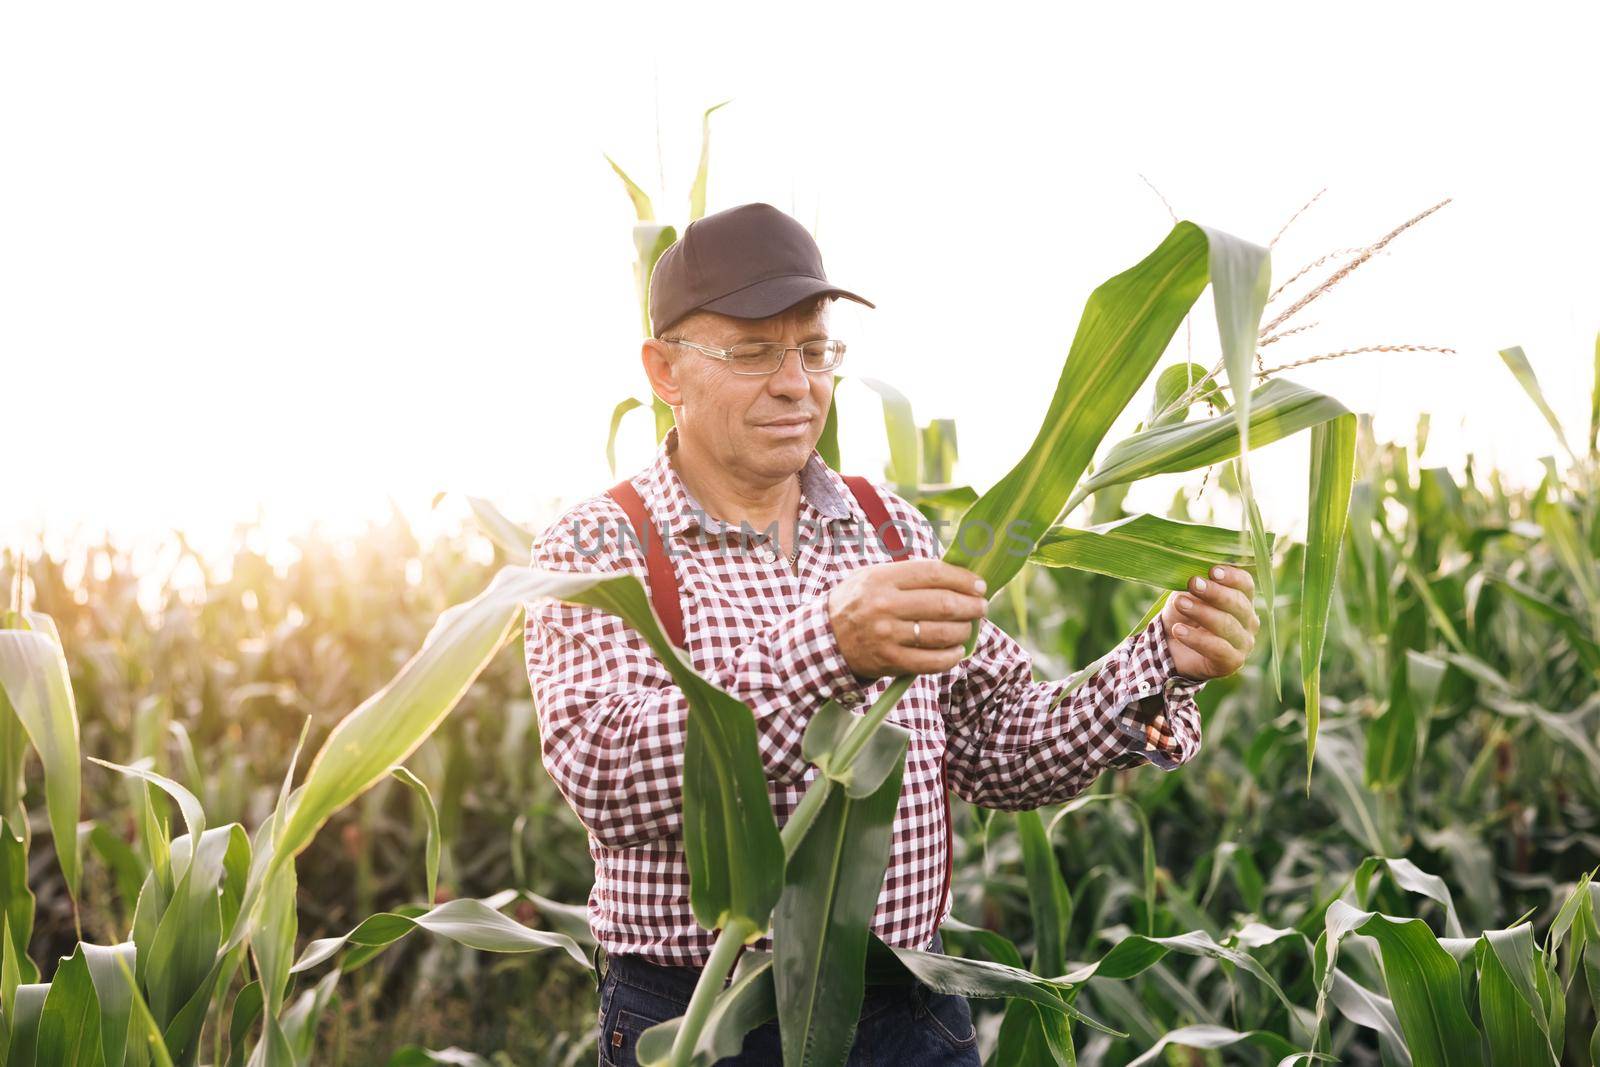 Agricultural products of farm corn. Farmer checks the harvest on the field. Male hand examining young corn plants. Farmer holds young corn leaves in his hand. Corn Maize Agriculture Nature Field.